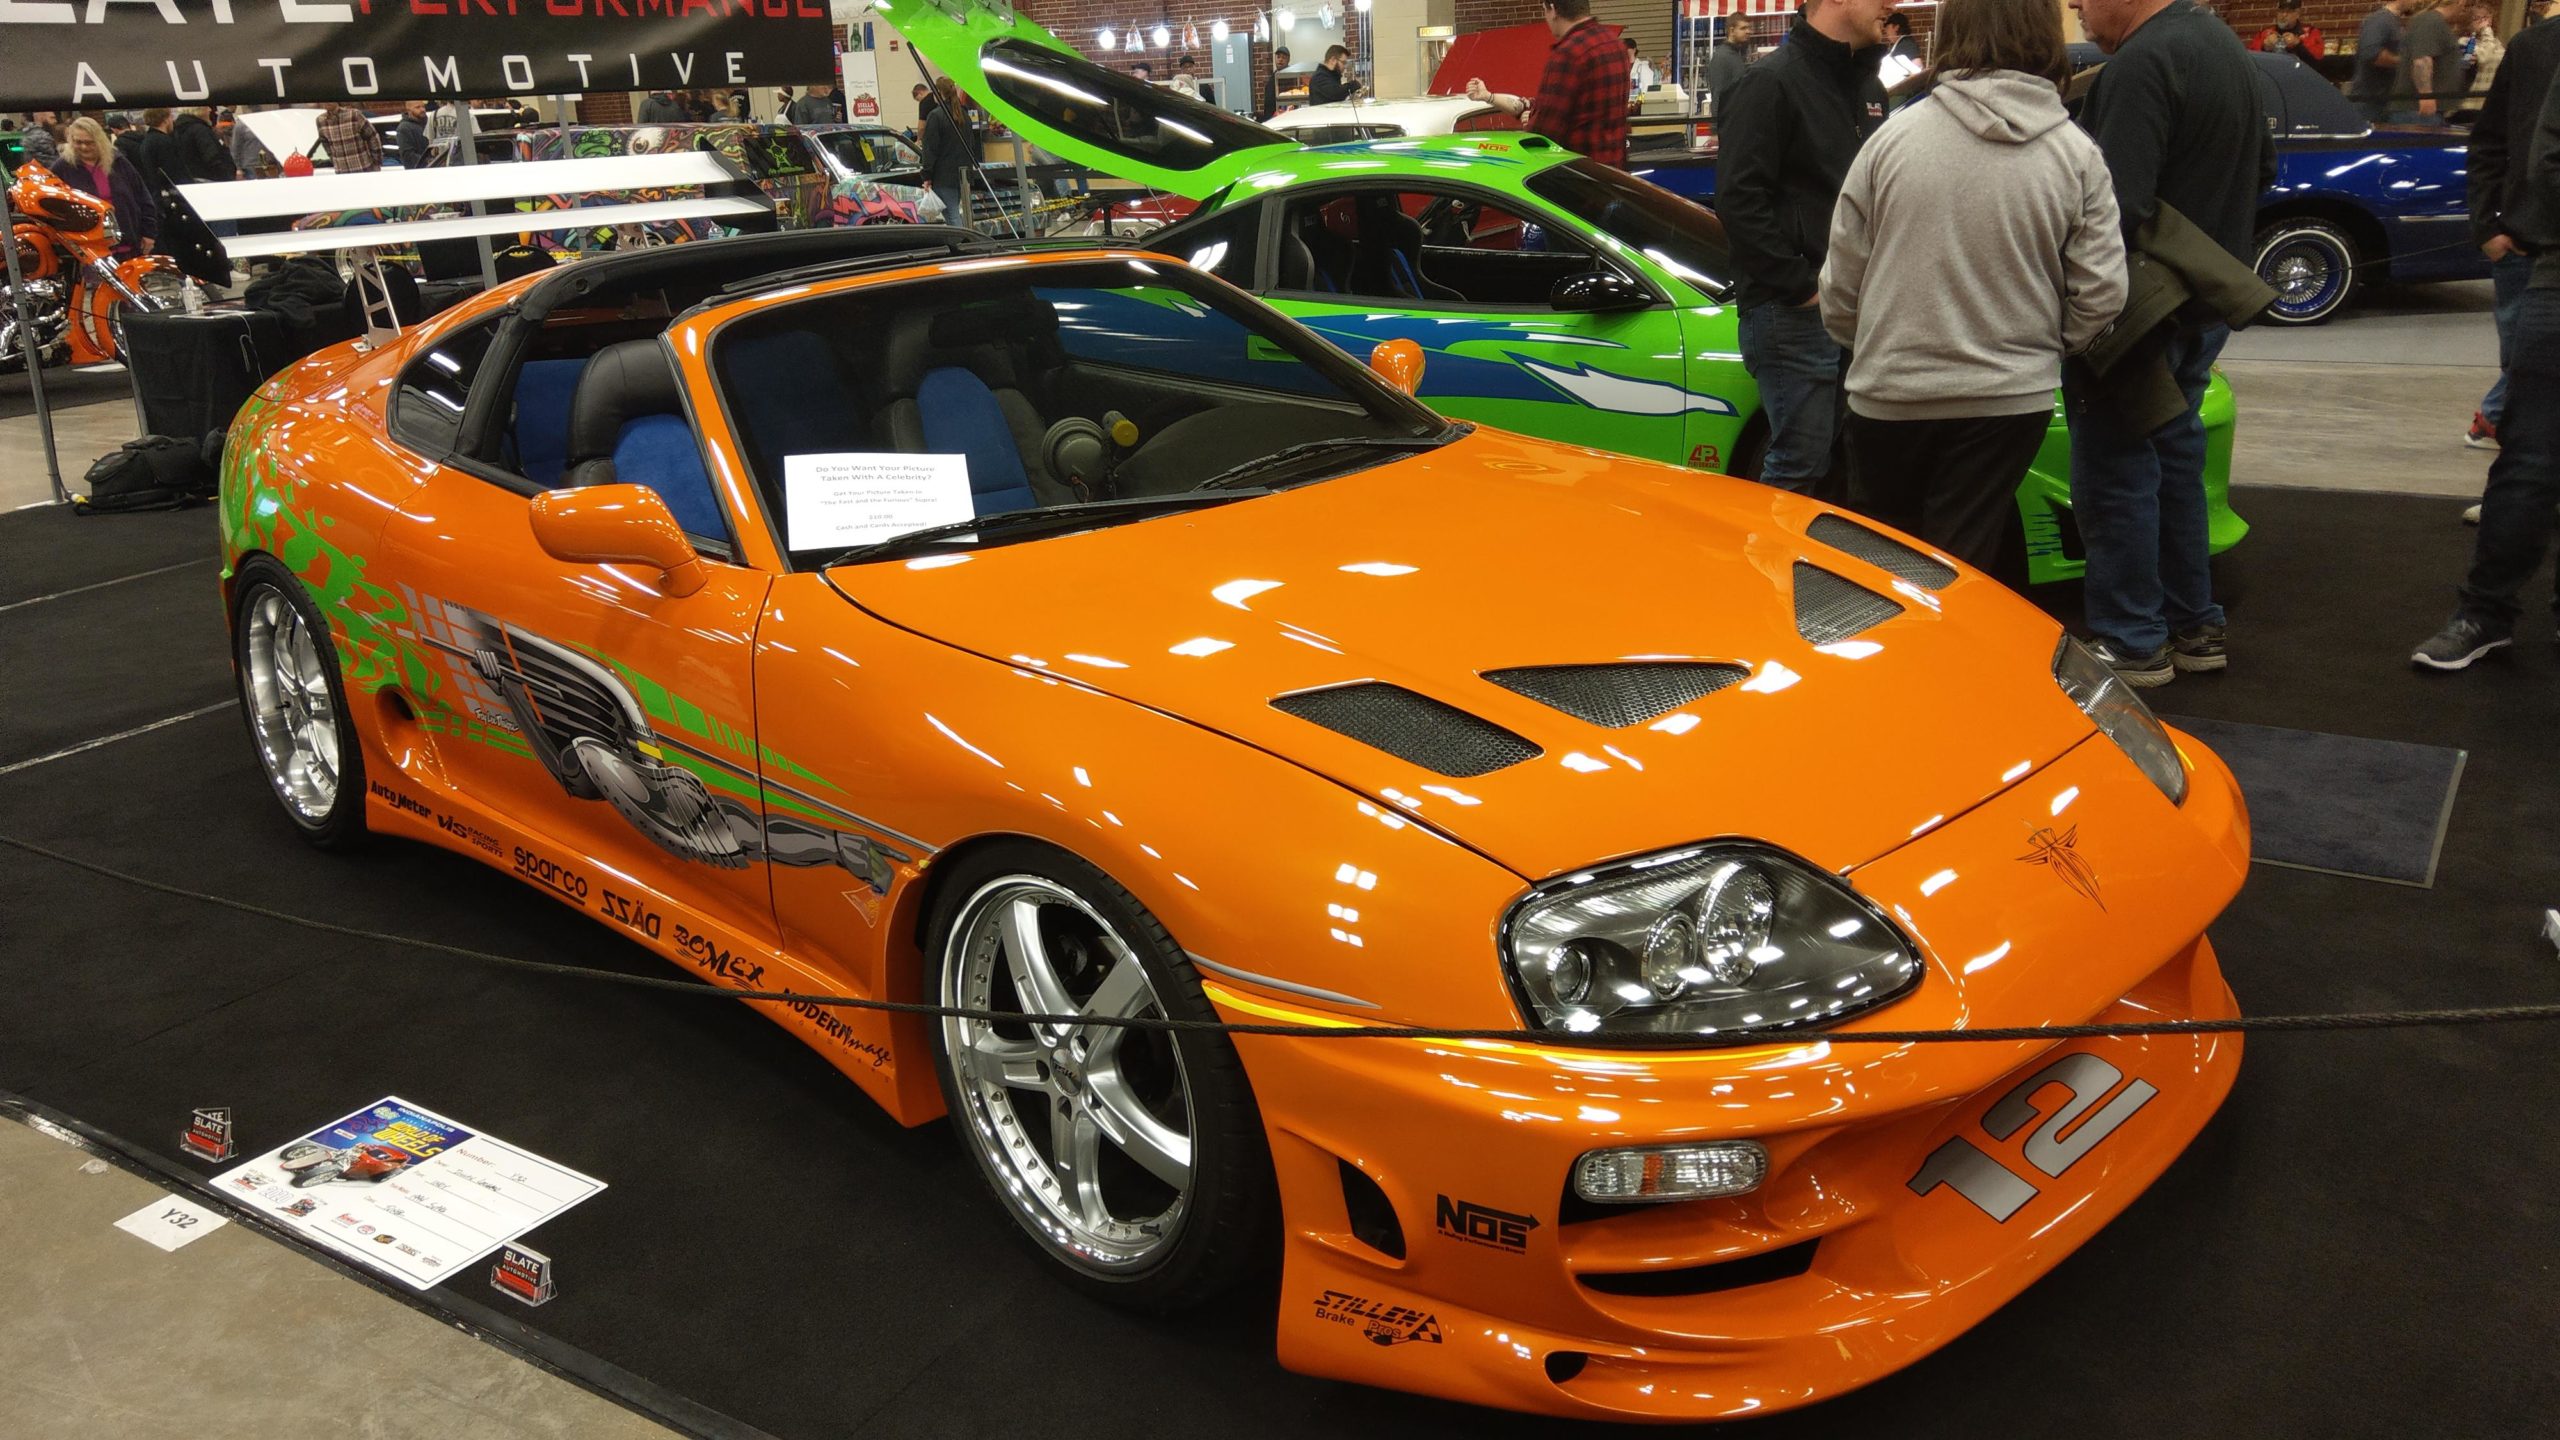 The fast and furious Toyota Supra and next to it is the Mitsubishi Eclipse